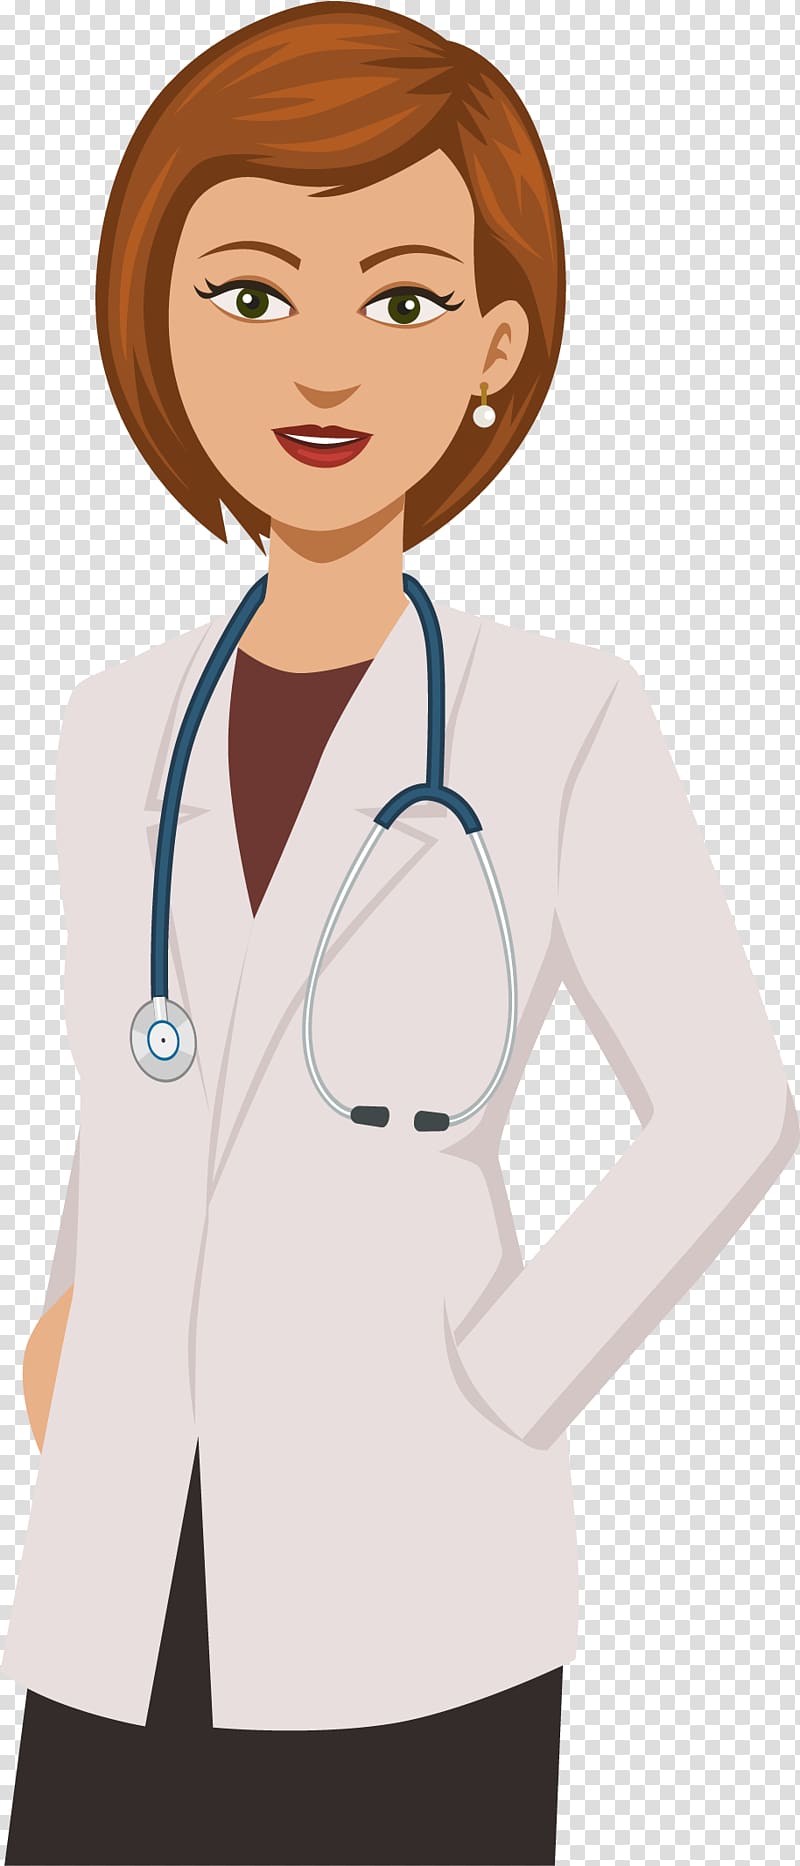 clipart doctor woman doctor